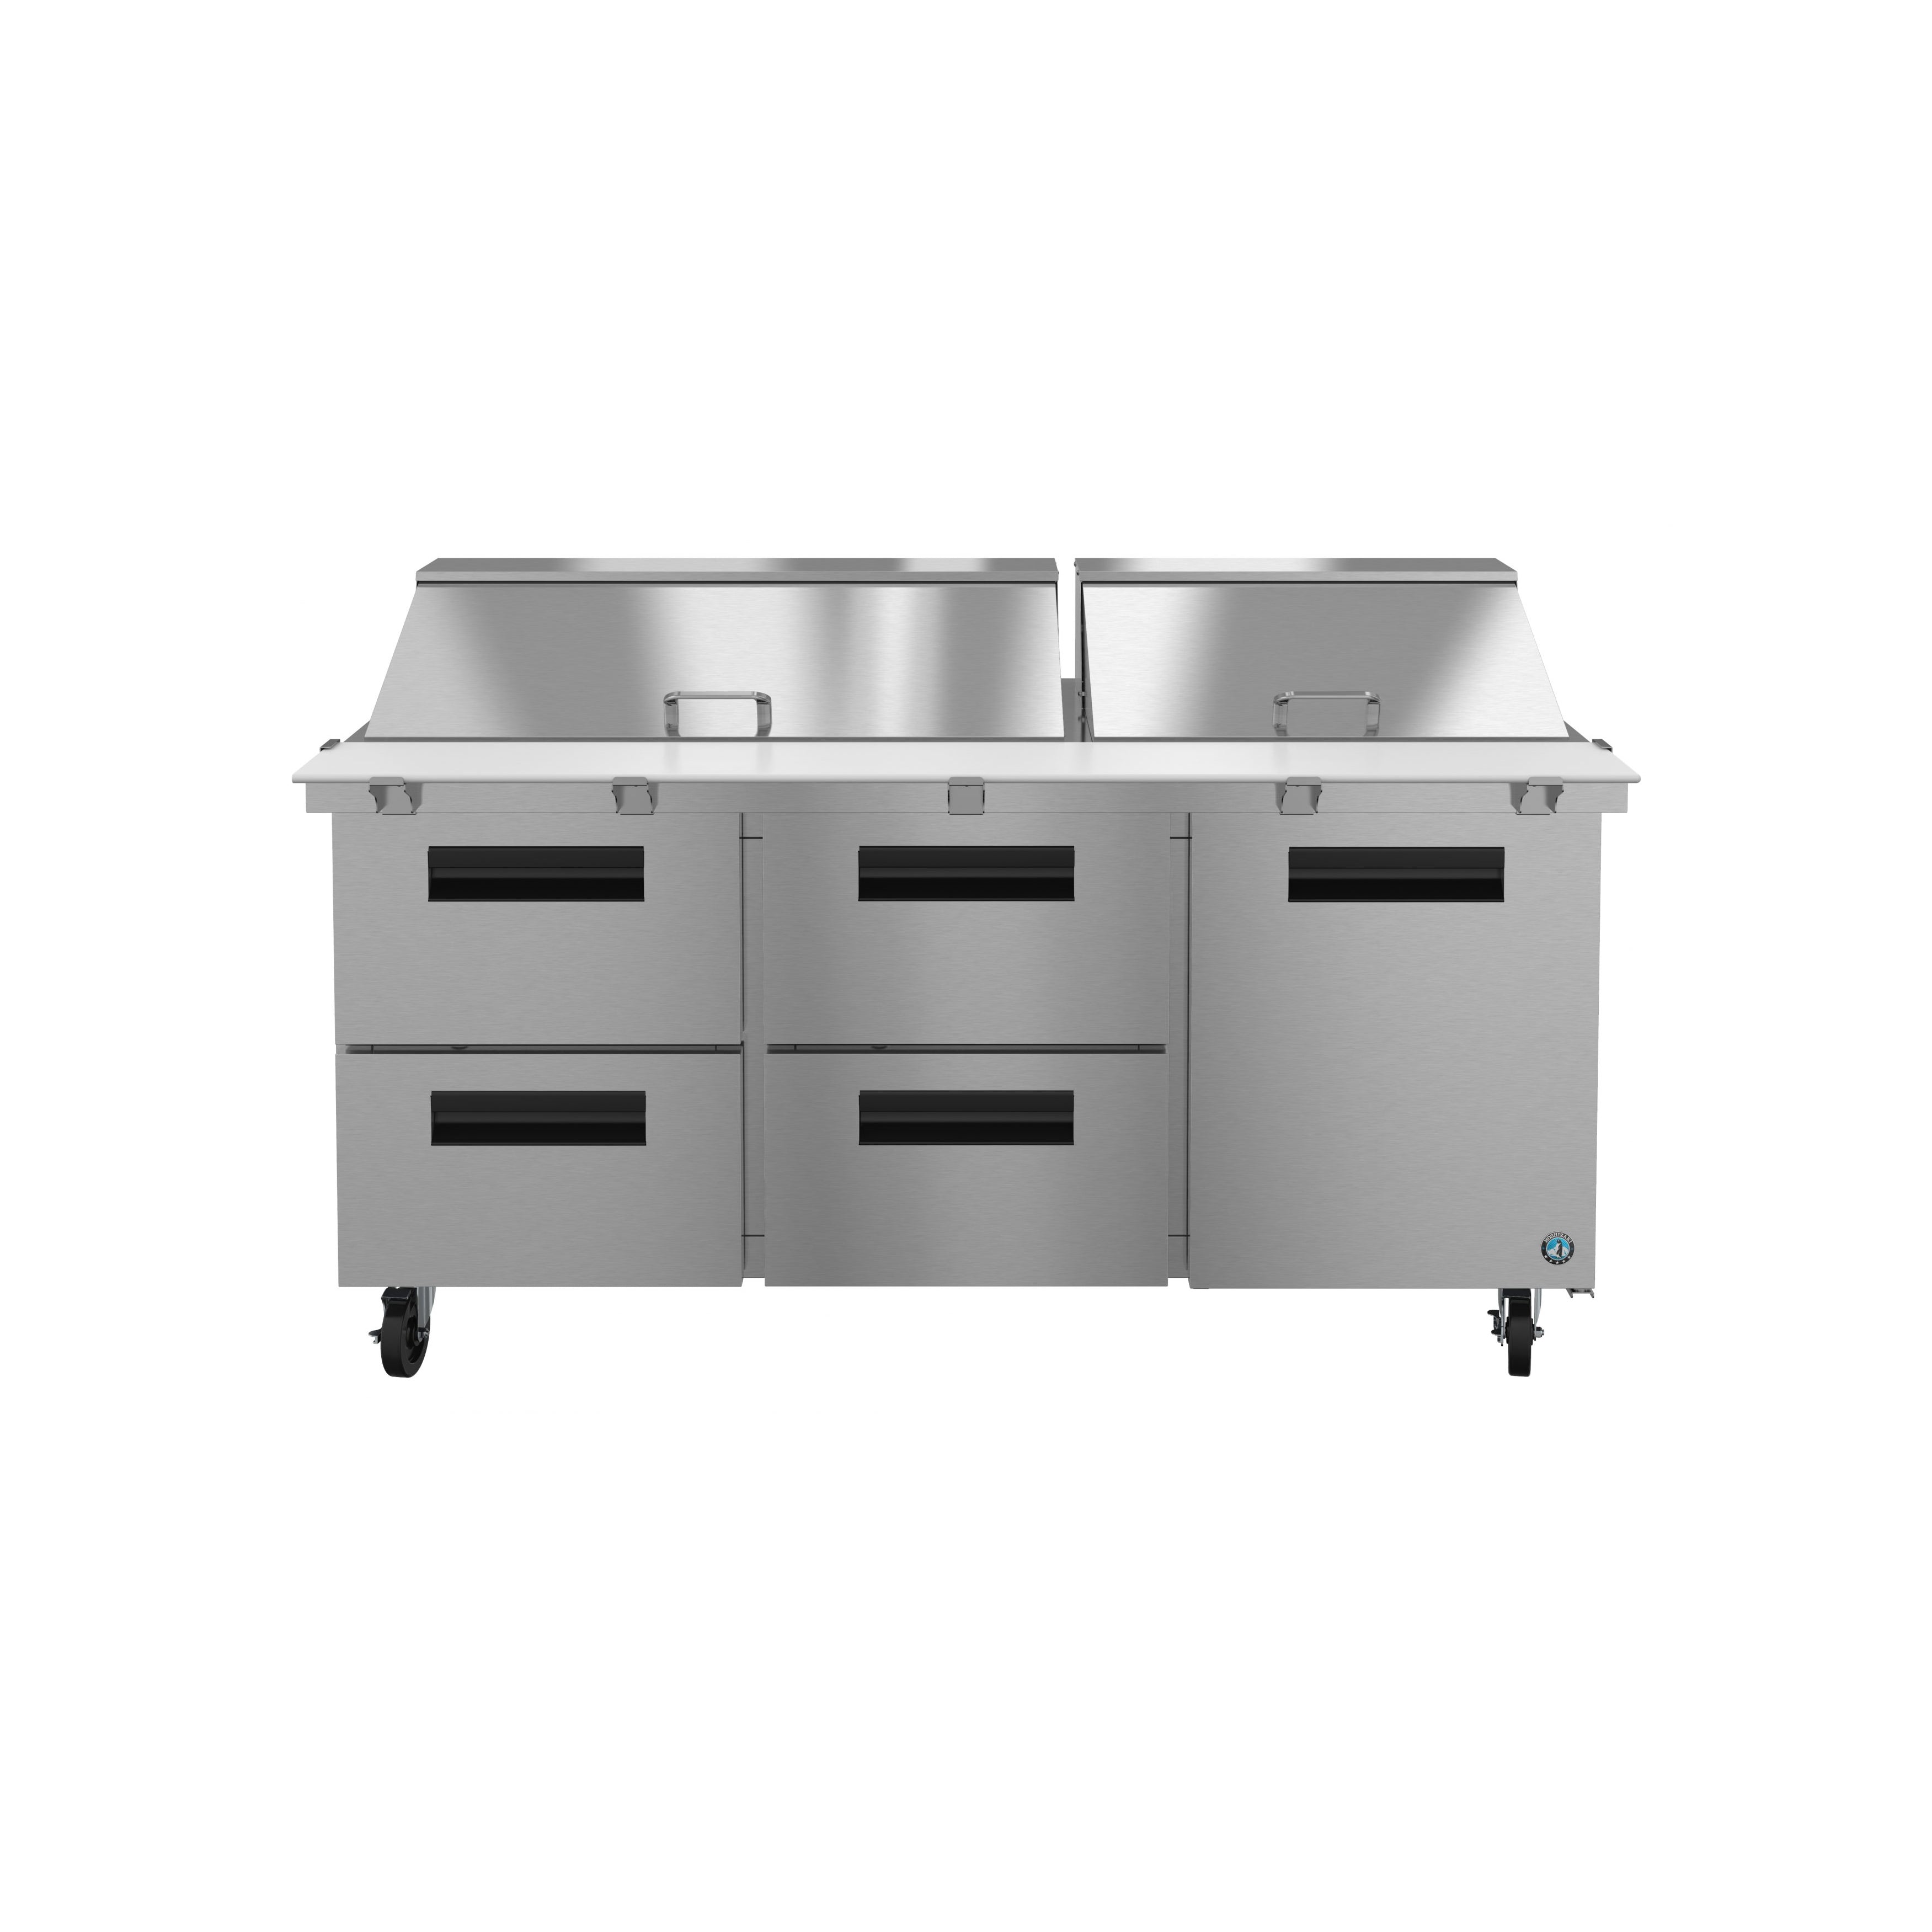 Hoshizaki - SR72A-30MD4, Commercial 72" 1 Door, 4 Drawer Mega Top Stainless Steel Refrigerated Sandwich Prep Table 18.63ct.ft.